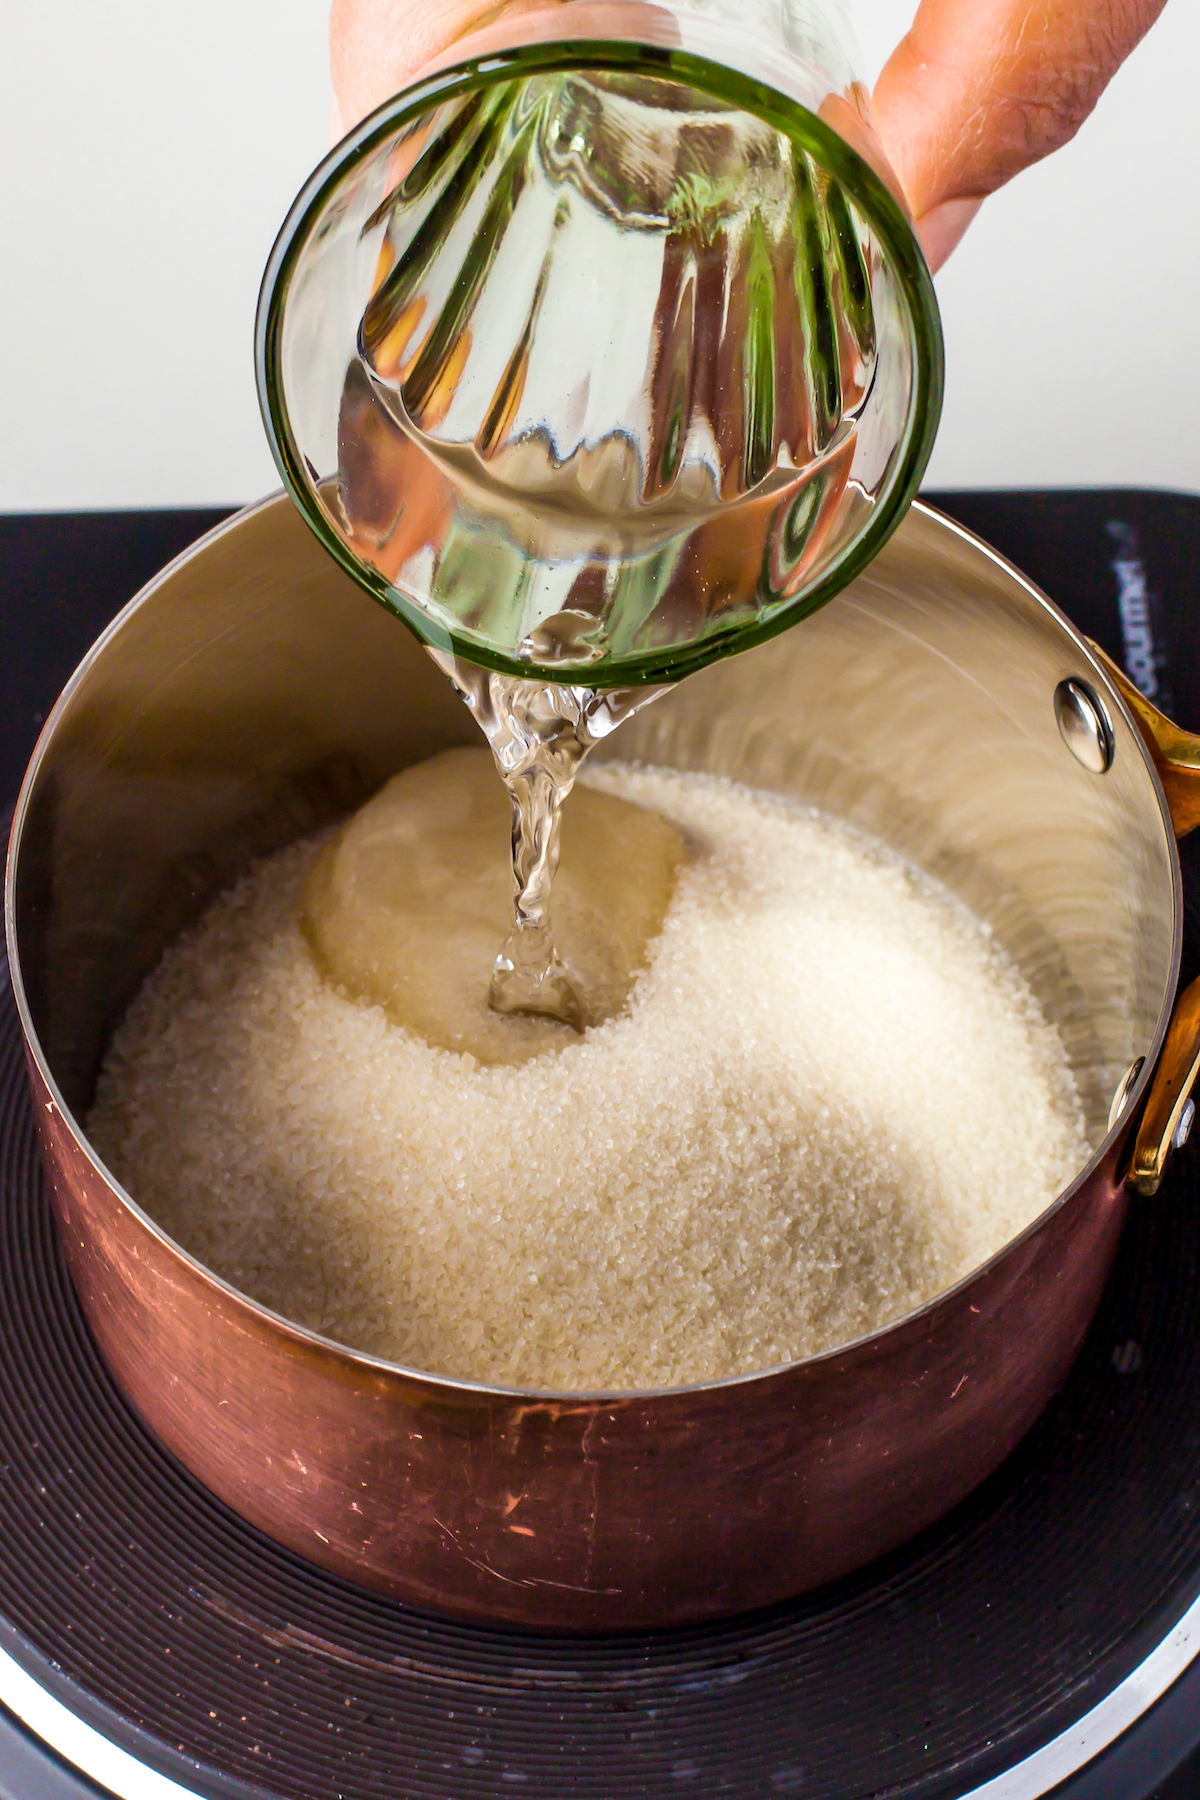 Pouring water into a pot with sugar to make simple syrup